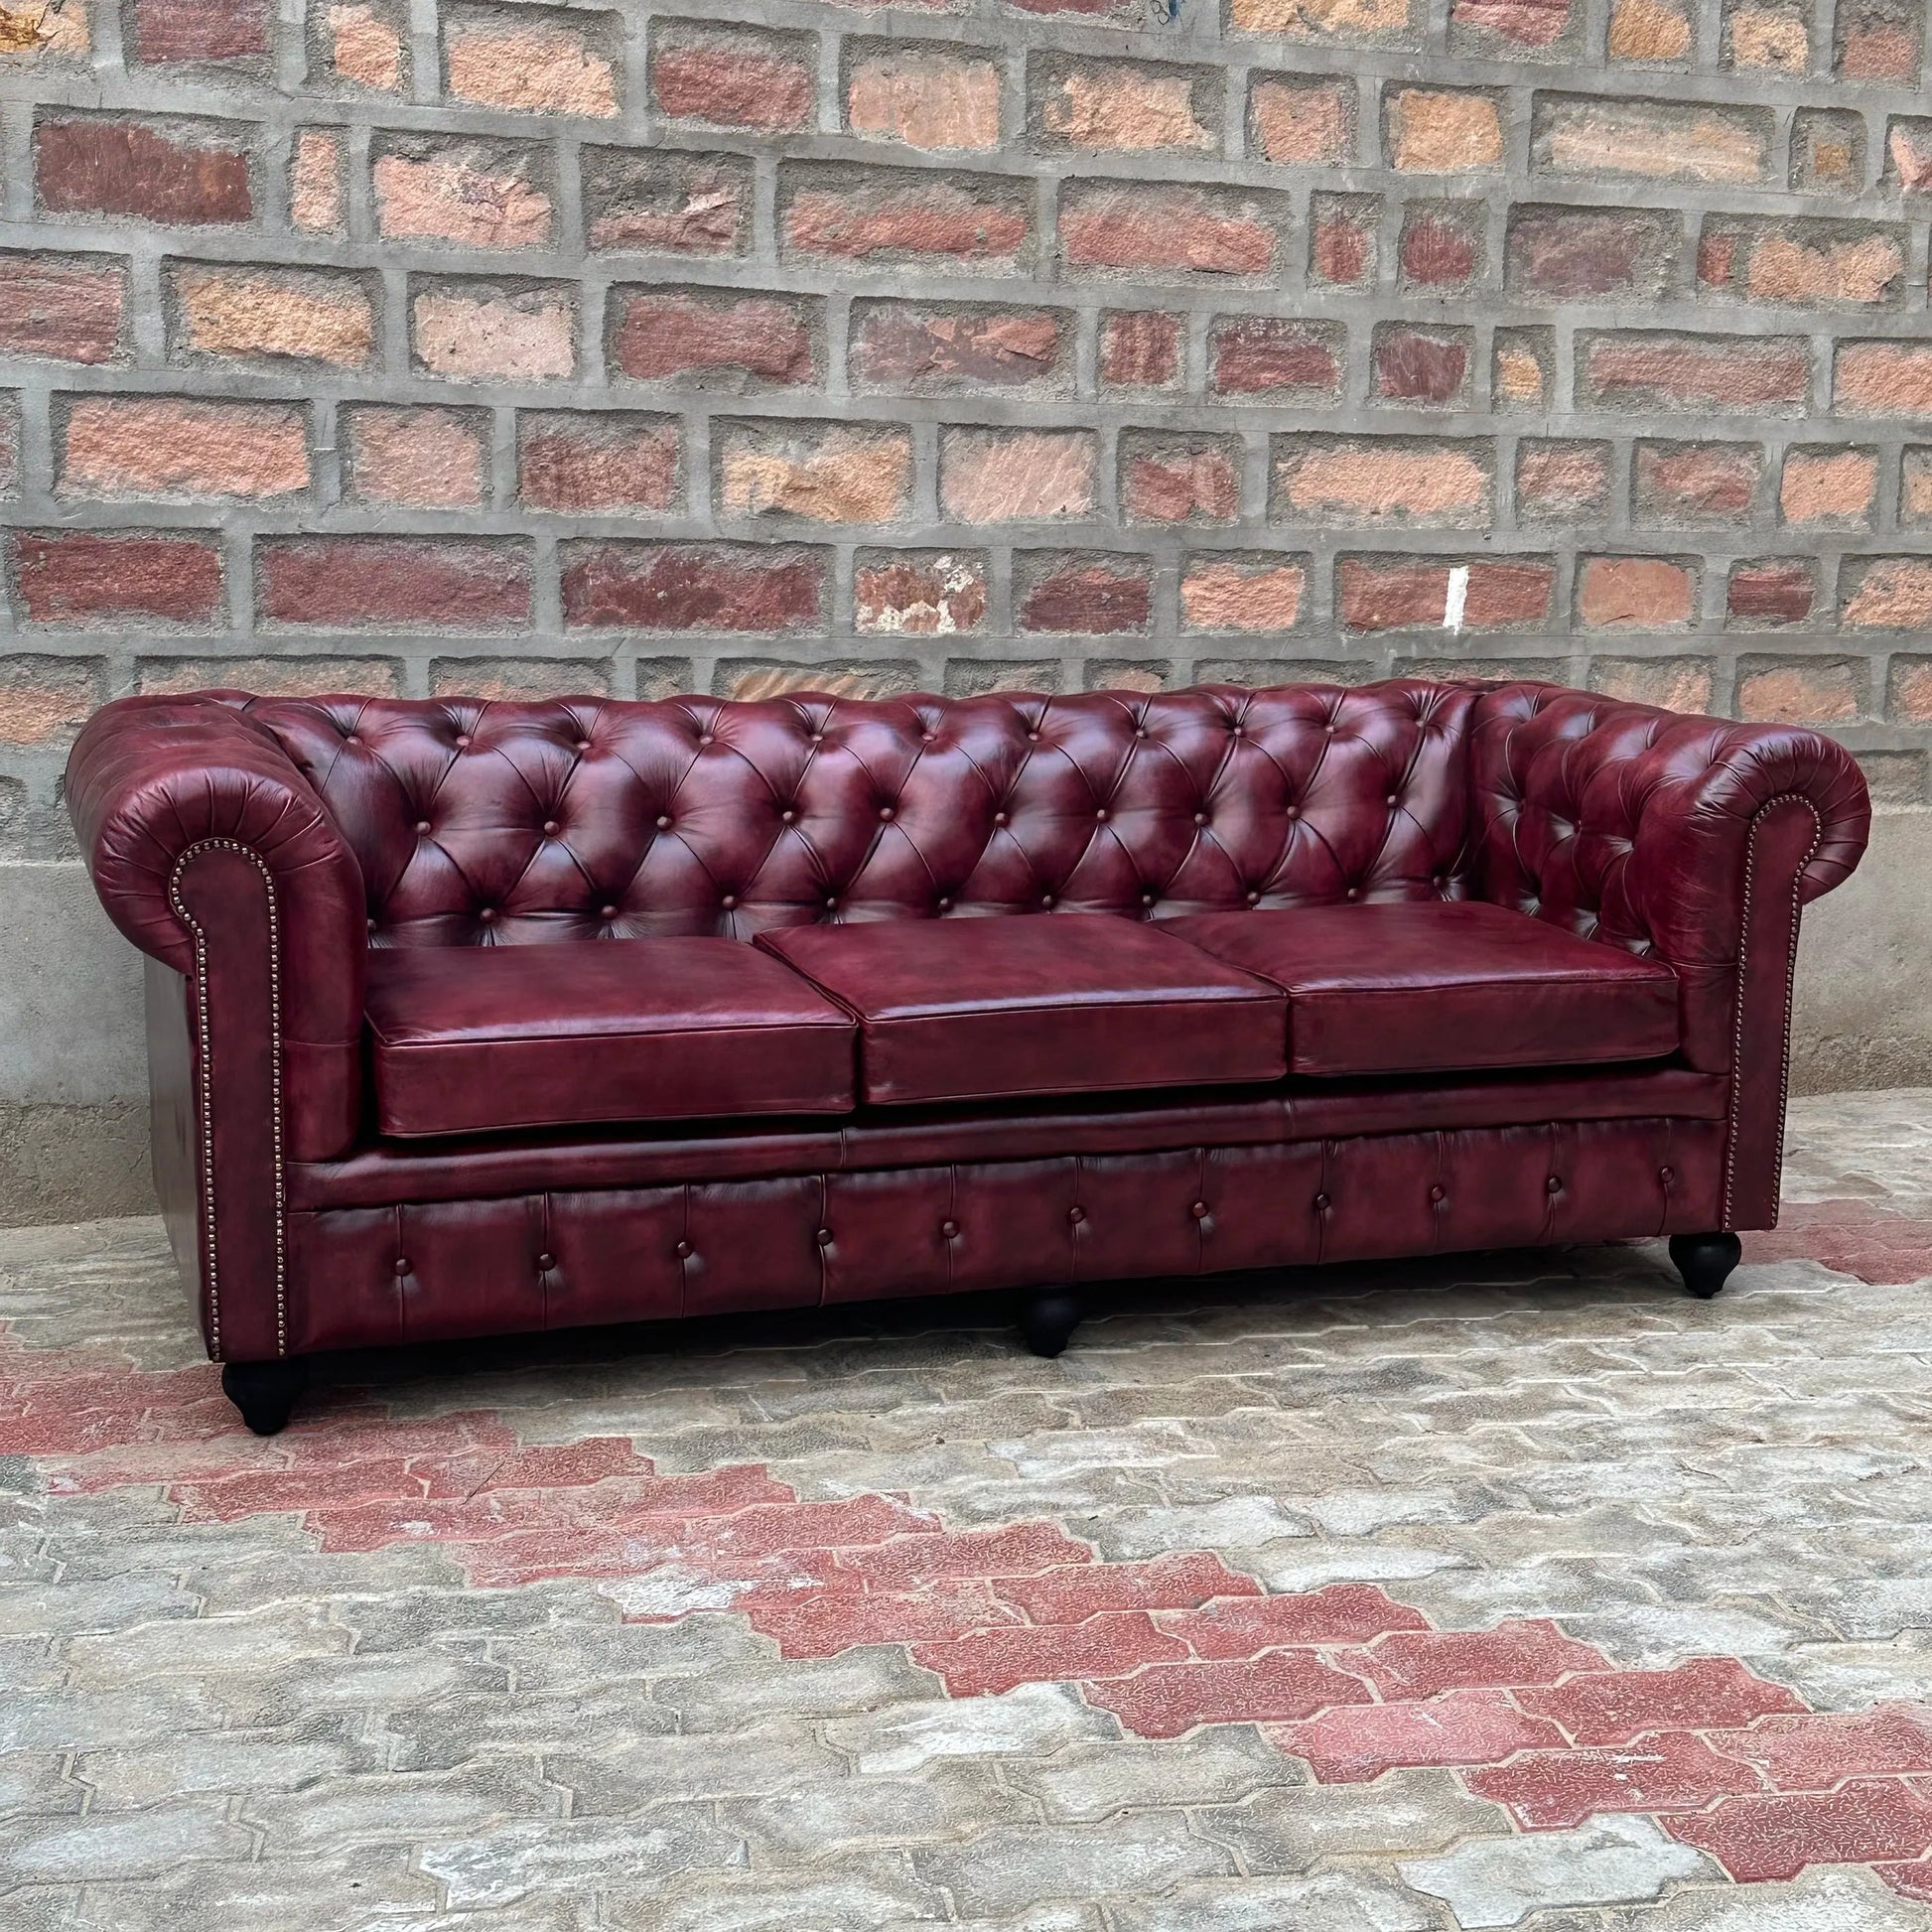 87" Sofa Normal Cushions | Oxford Red Chesterfield Leather Sofa with Normal Cushions (OR-3C) by Rising Tide Design Co.